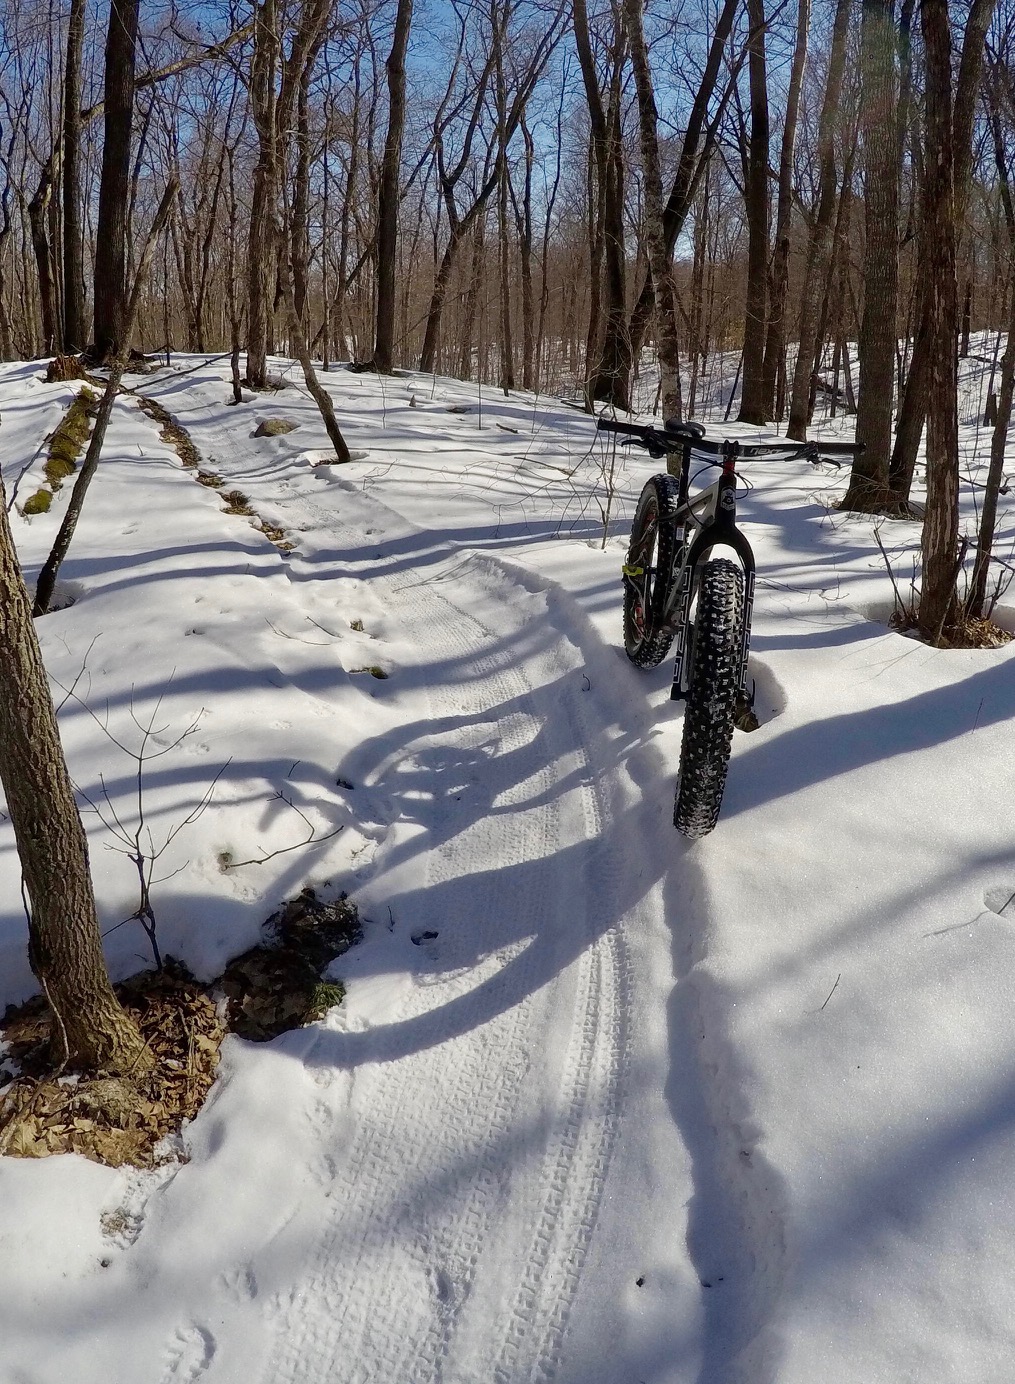 Twin Lakes singletrack in great shape for fat biking, particularily the first and last segments. March 2nd, 2017. Please ride in the morning over the weekend.